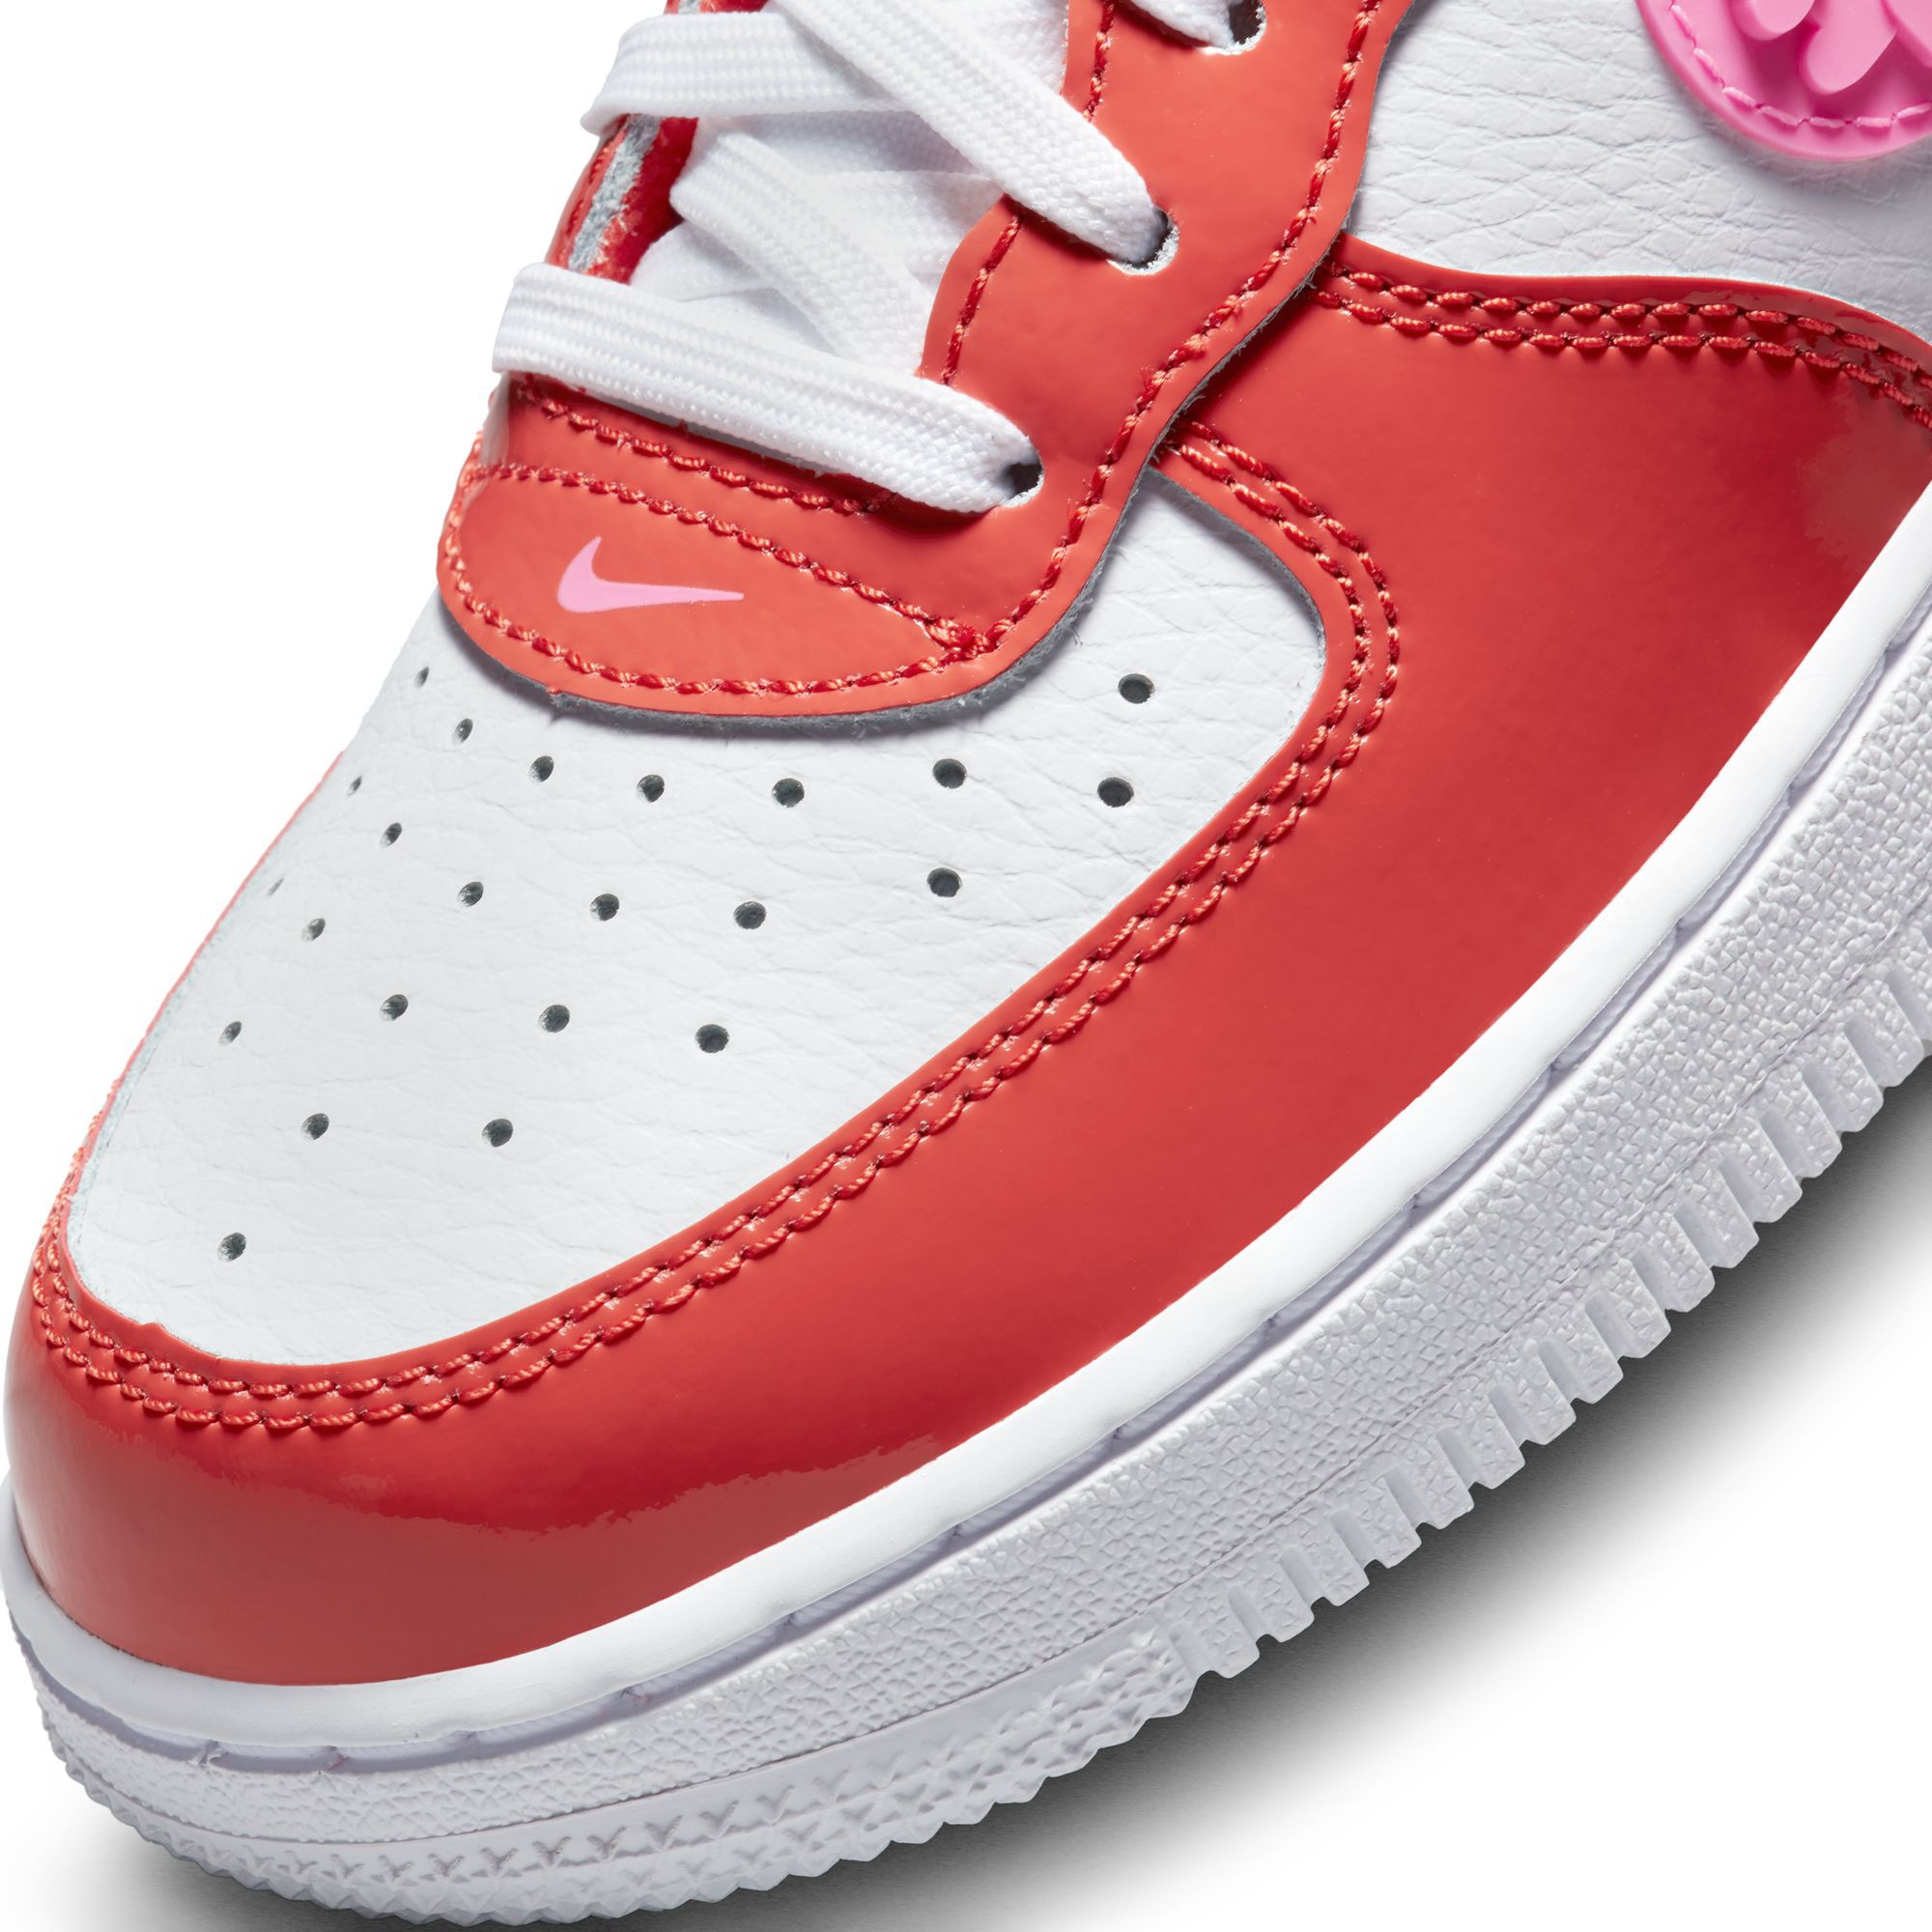 Nike Force 1 Lv8 Baby/toddler Shoes In Picante Red/pink Spell/white